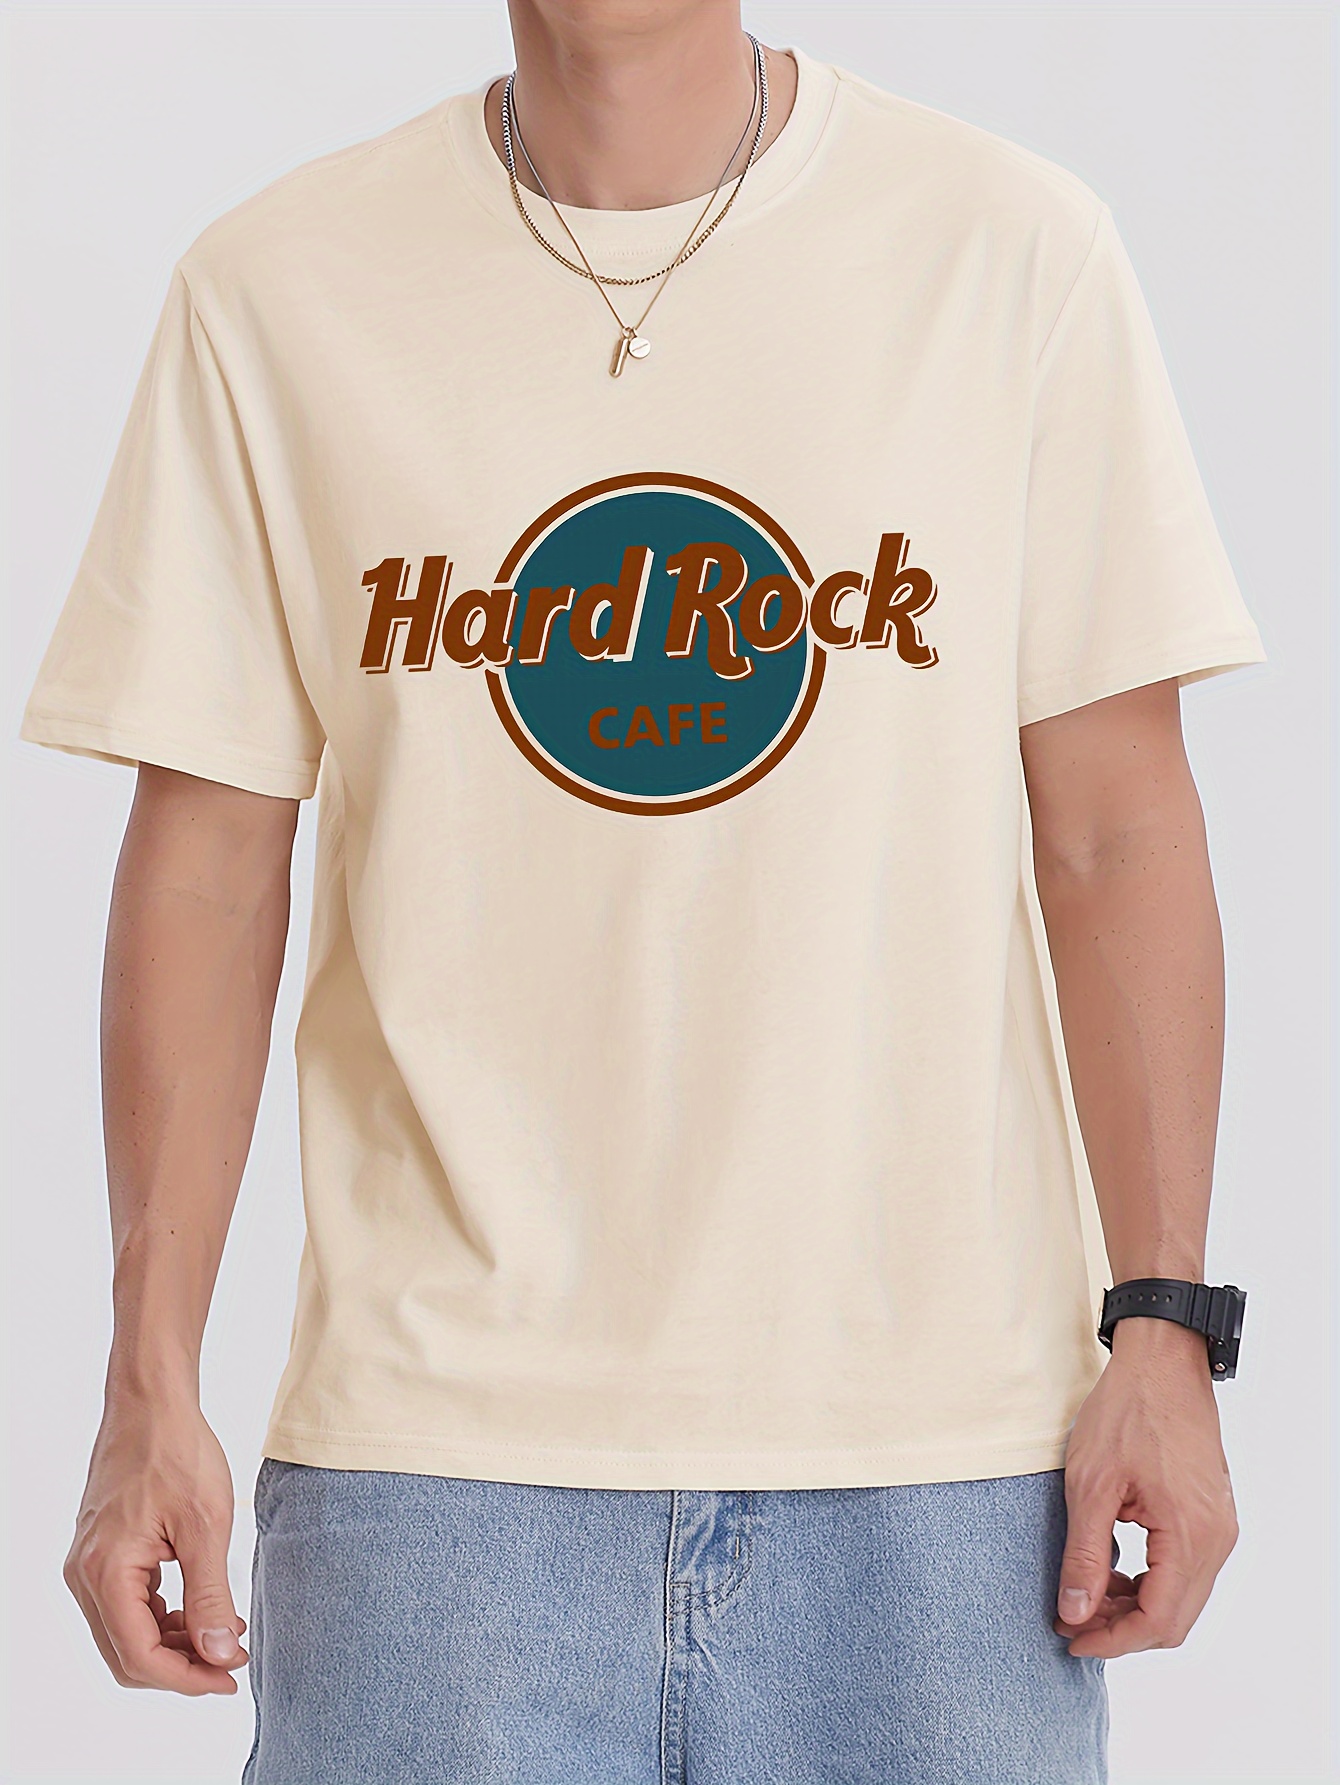 Creative Hard Rock Cafe Letter Print T-shirt, Stylish & Breathable Street Fashion For Men, Simple Comfy Top, Casual Crew Neck Short Sleeve T-shirt For Summer